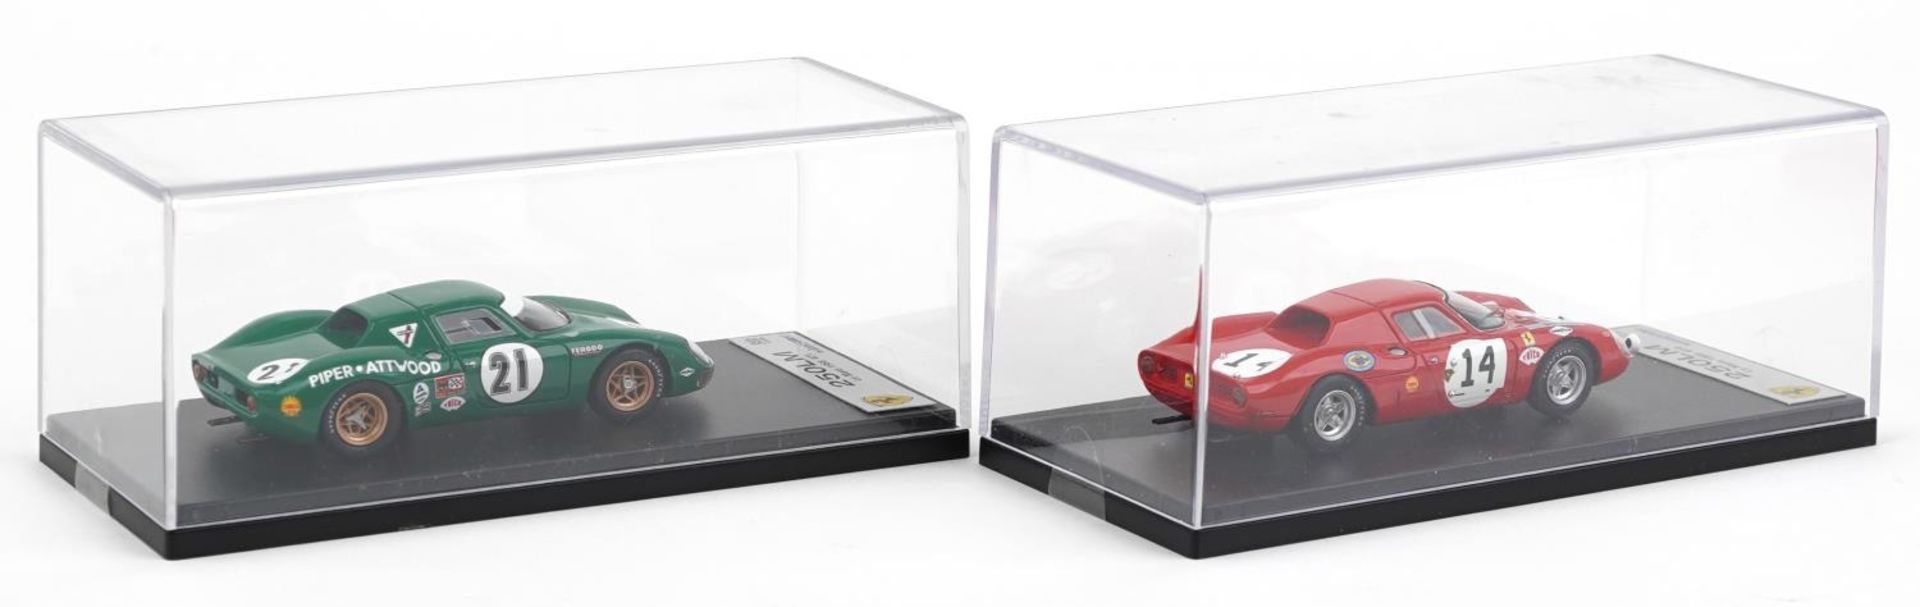 Two Looksmart 1:43 scale diecast model racing vehicles with boxes and display cases comprising Le - Bild 3 aus 3